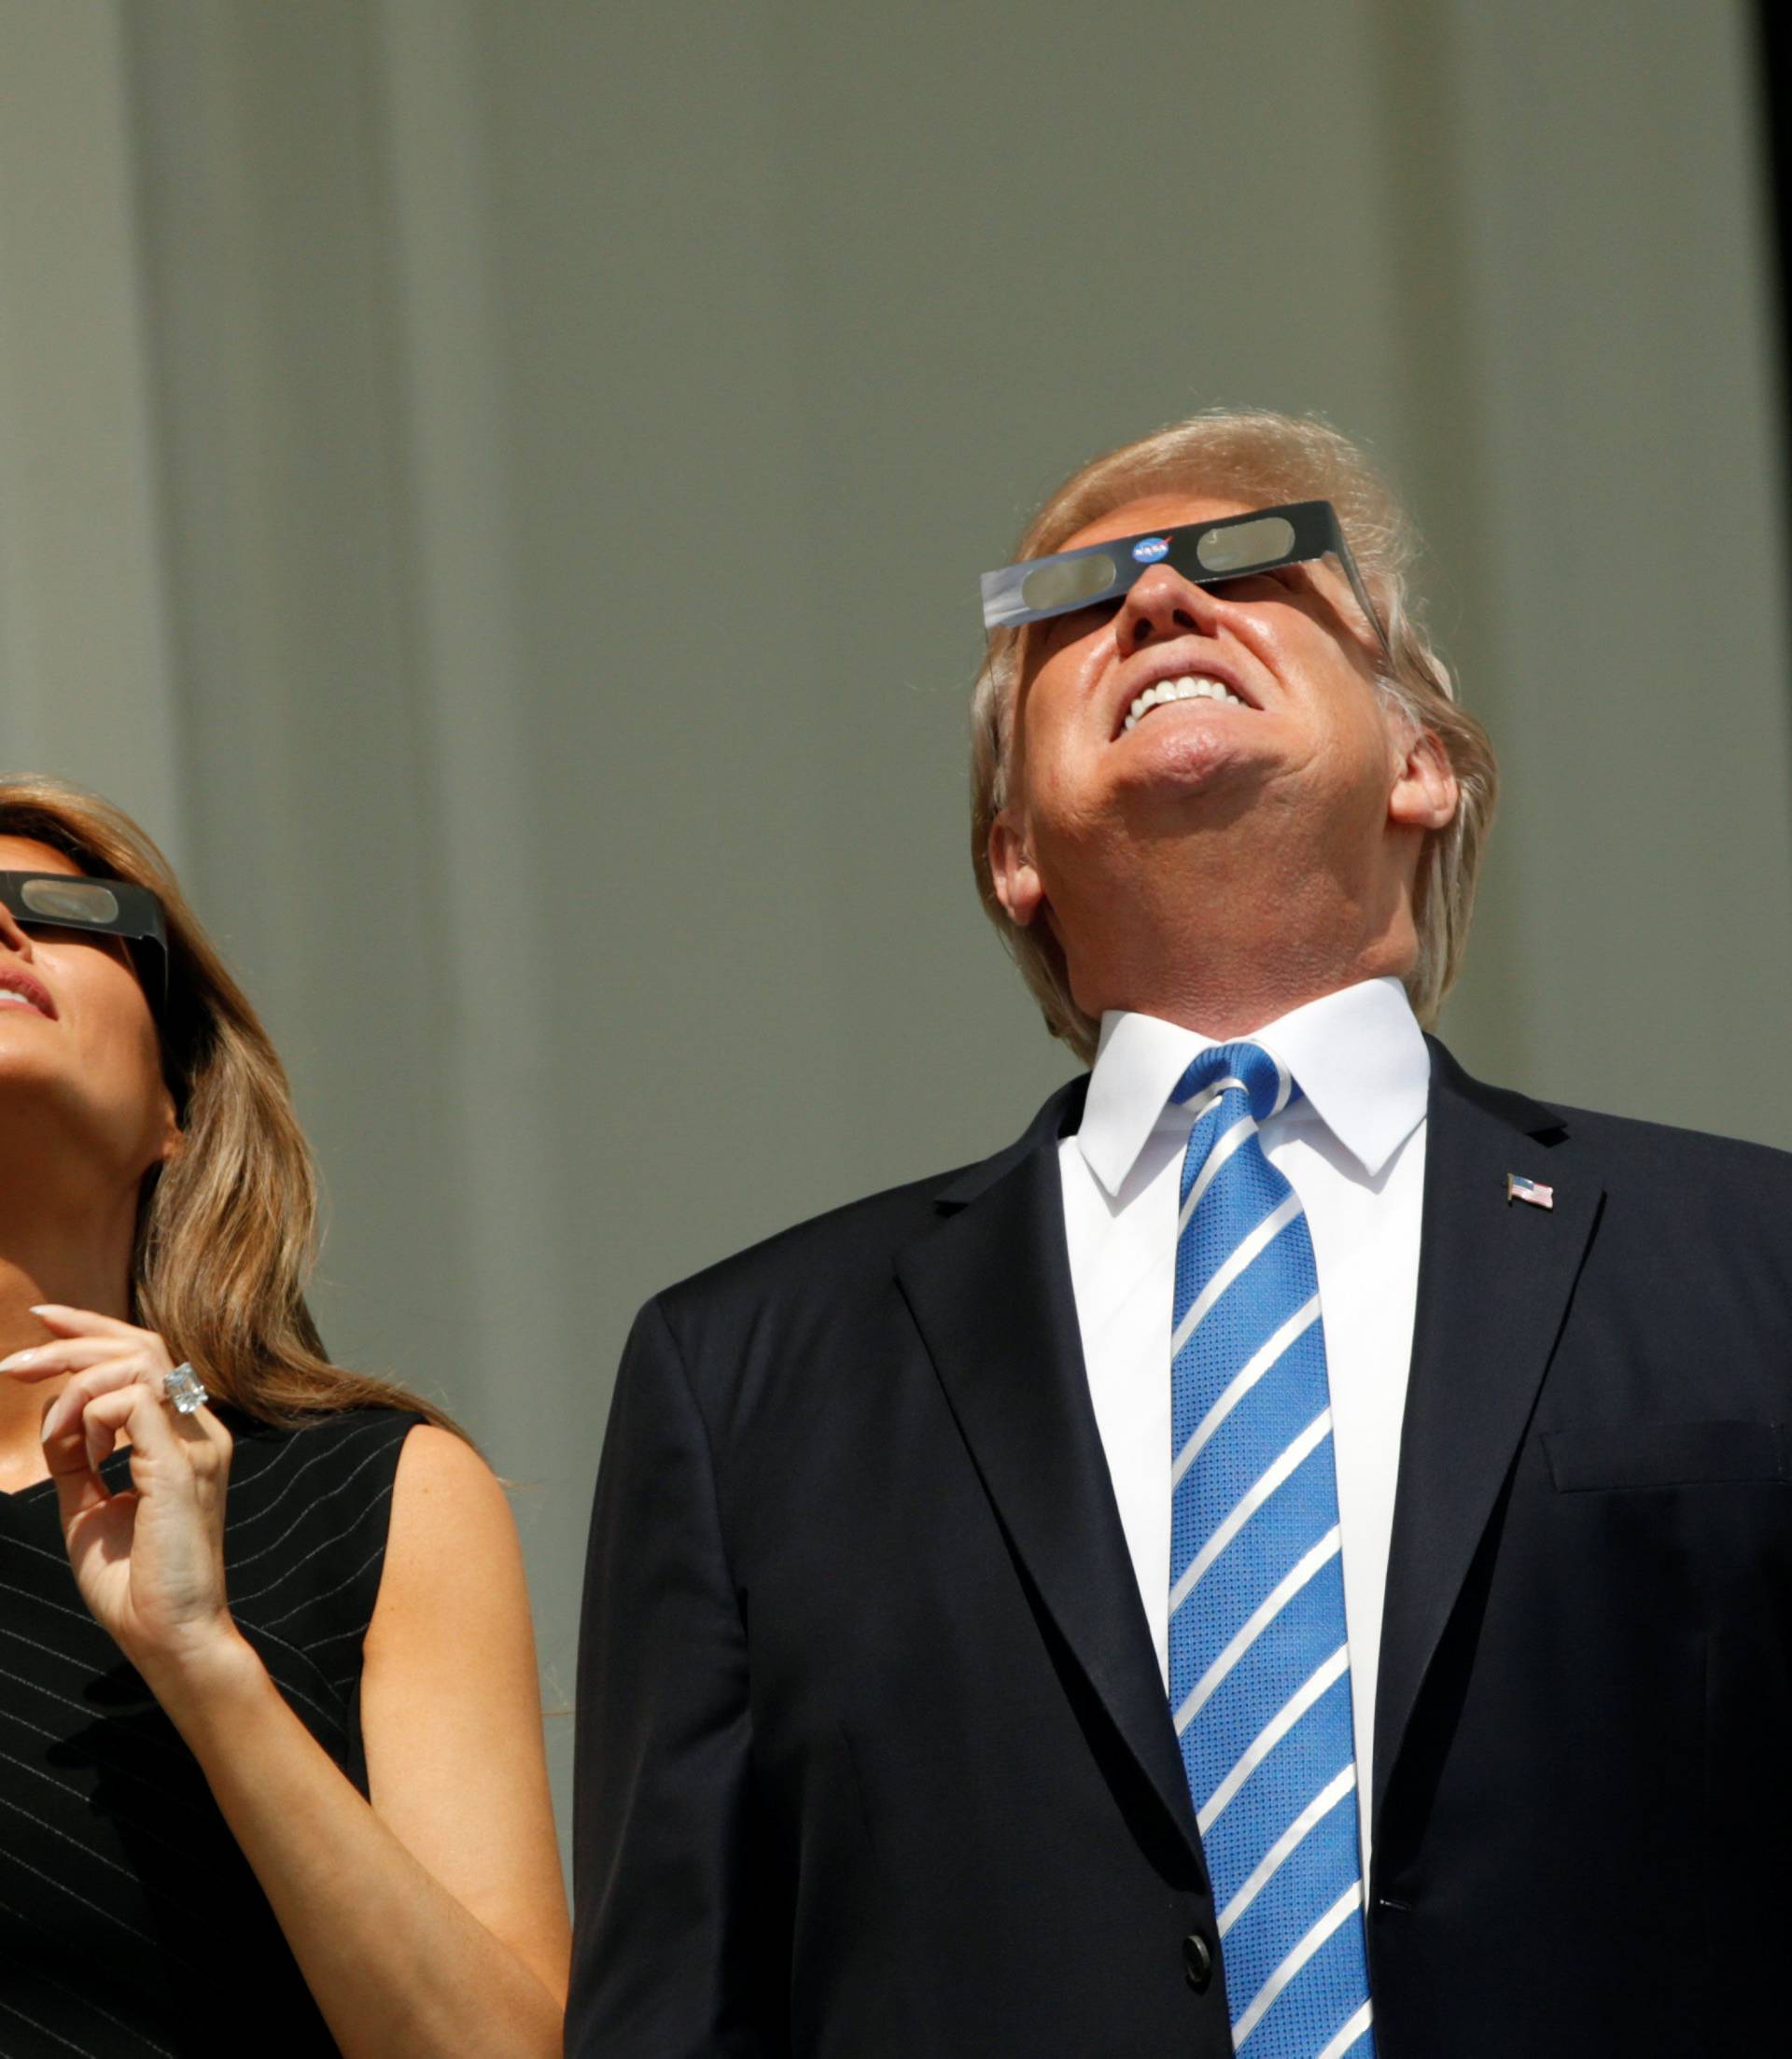 U.S. President Trump and Melania Trump watch the solar eclipse from the White House in Washington